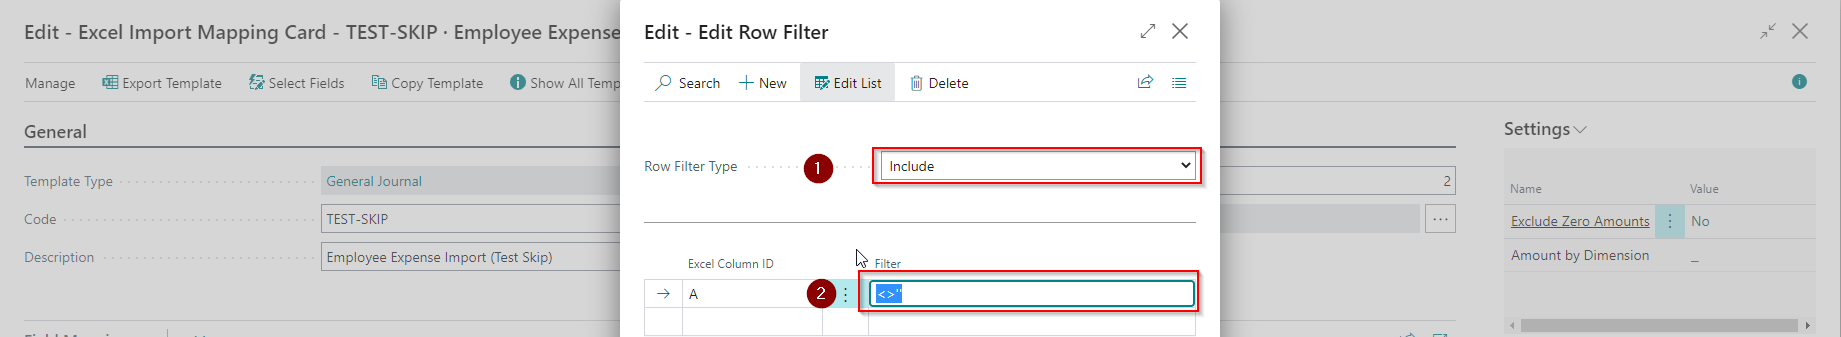 Edit Row Filter - Include